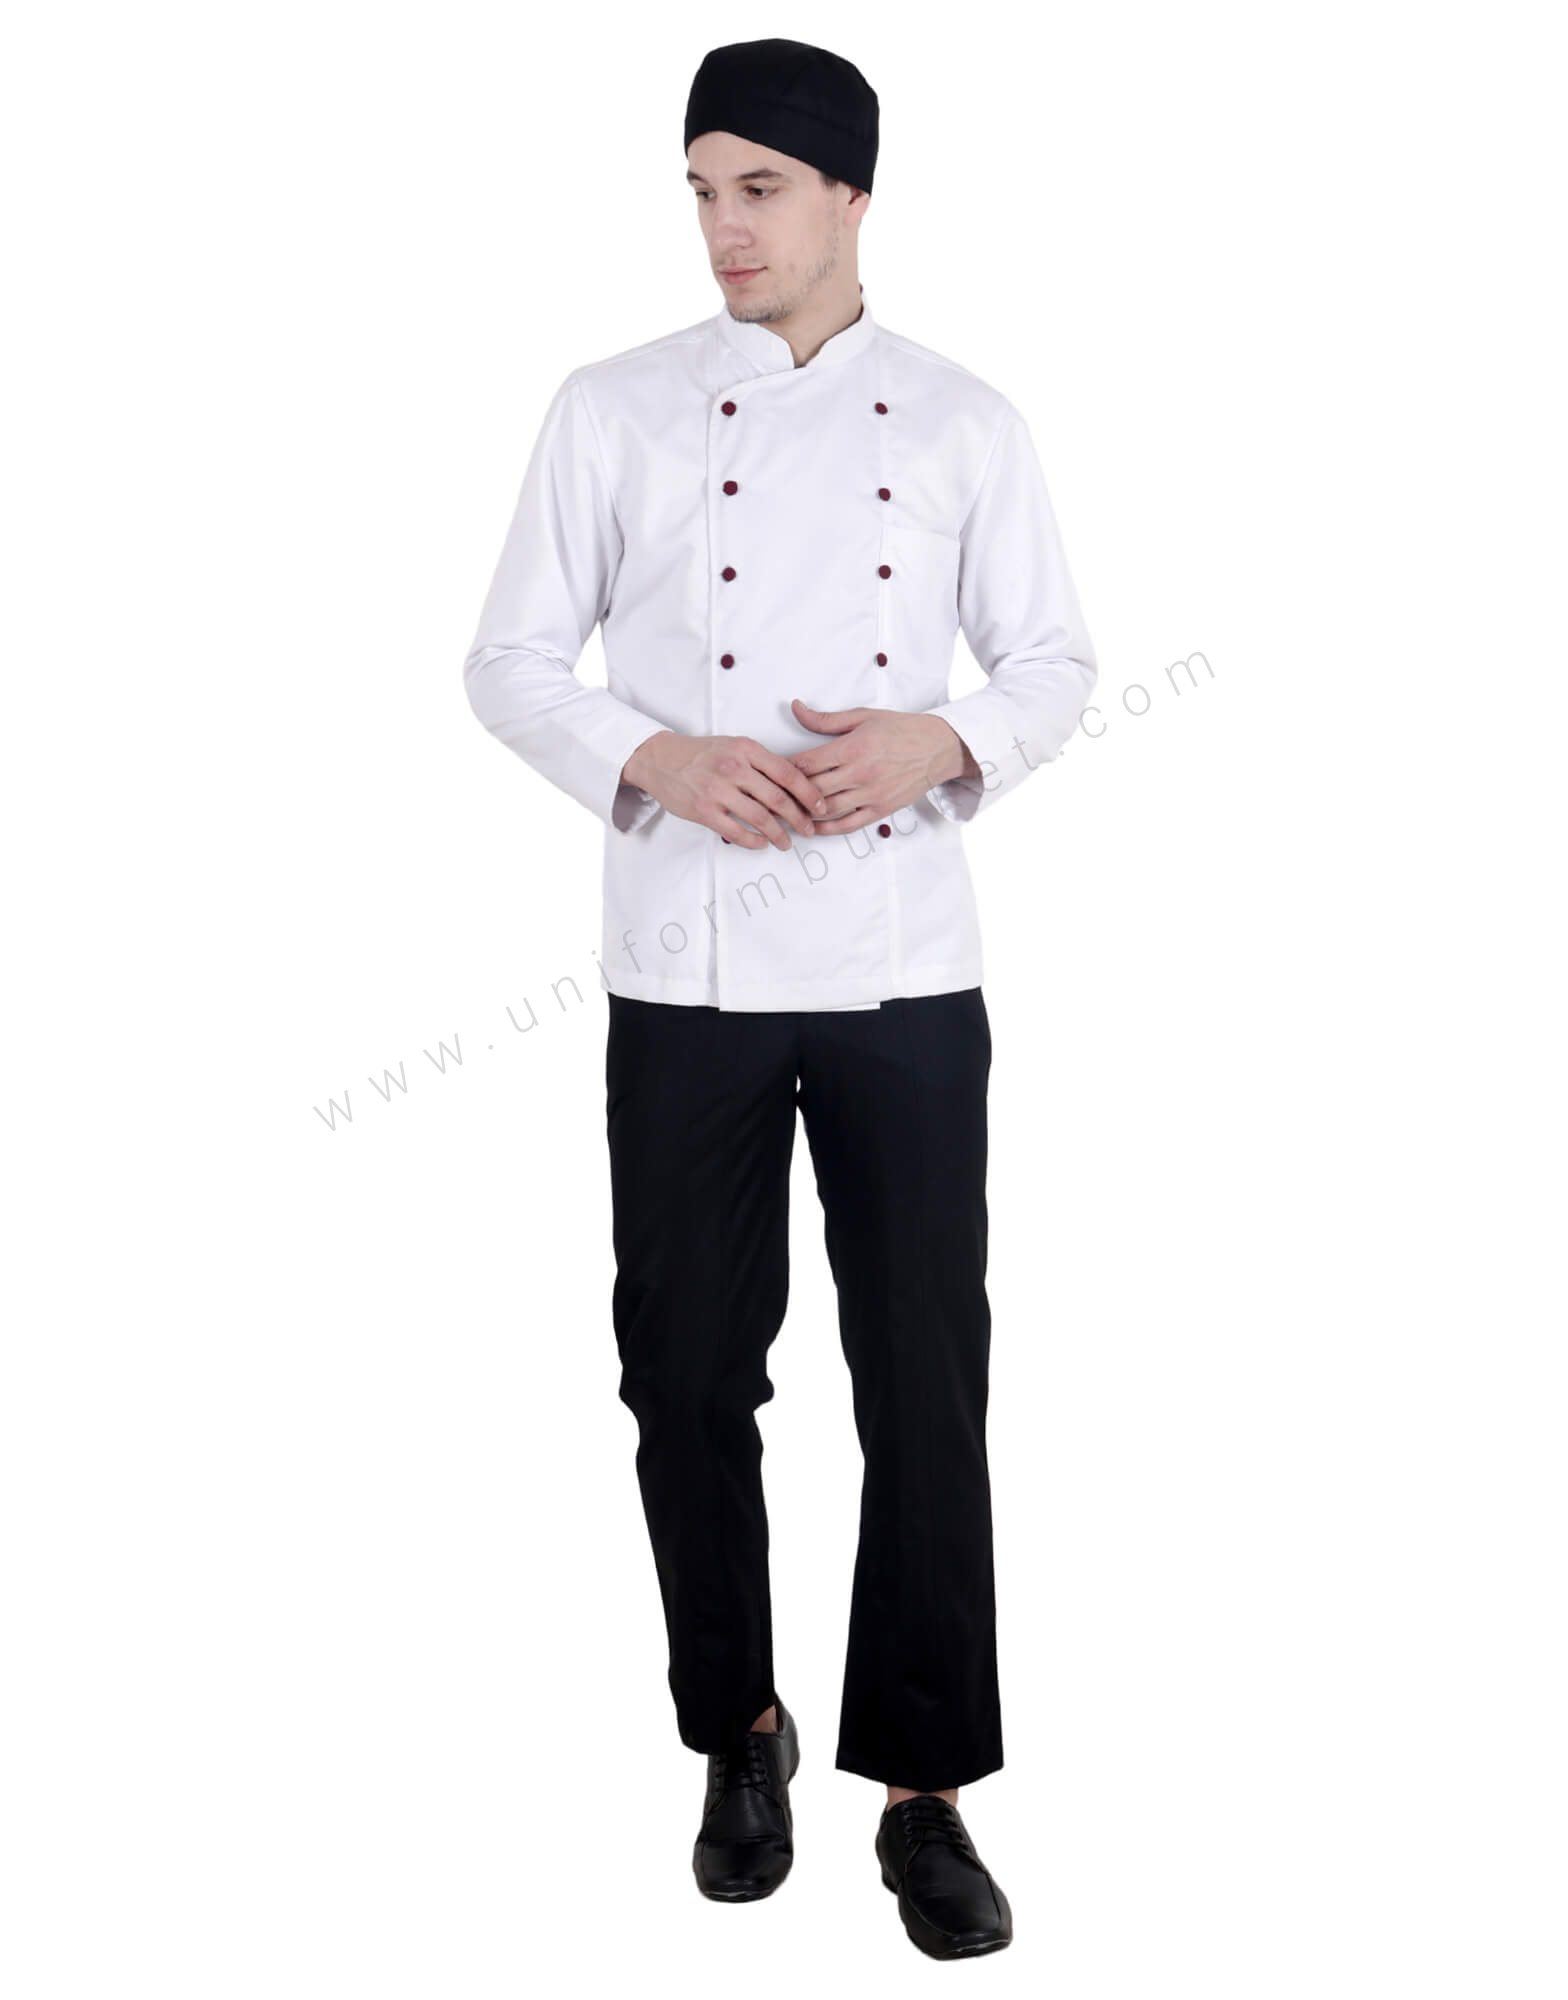 2FCC MENS WHITE DOUBLE BREASTED CHEF CHEFS CATERING JACKET SZ XL XXL 